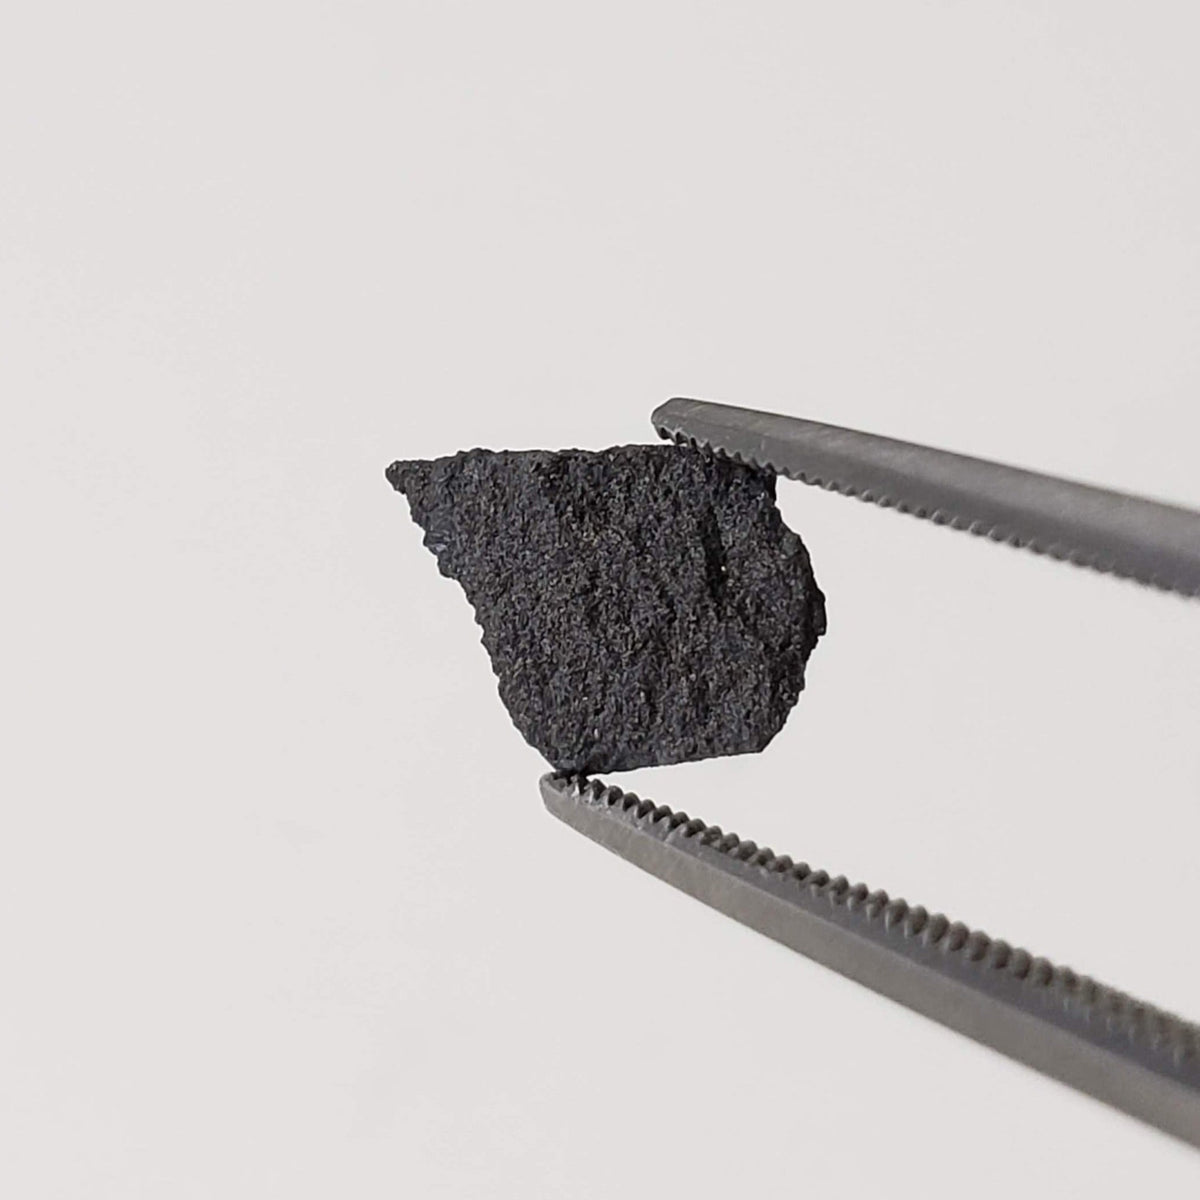 Abee Meteorite | 124 mg | Fragment | Rare Enstatite | EH4 Class | Observed Fall 1952 Canada